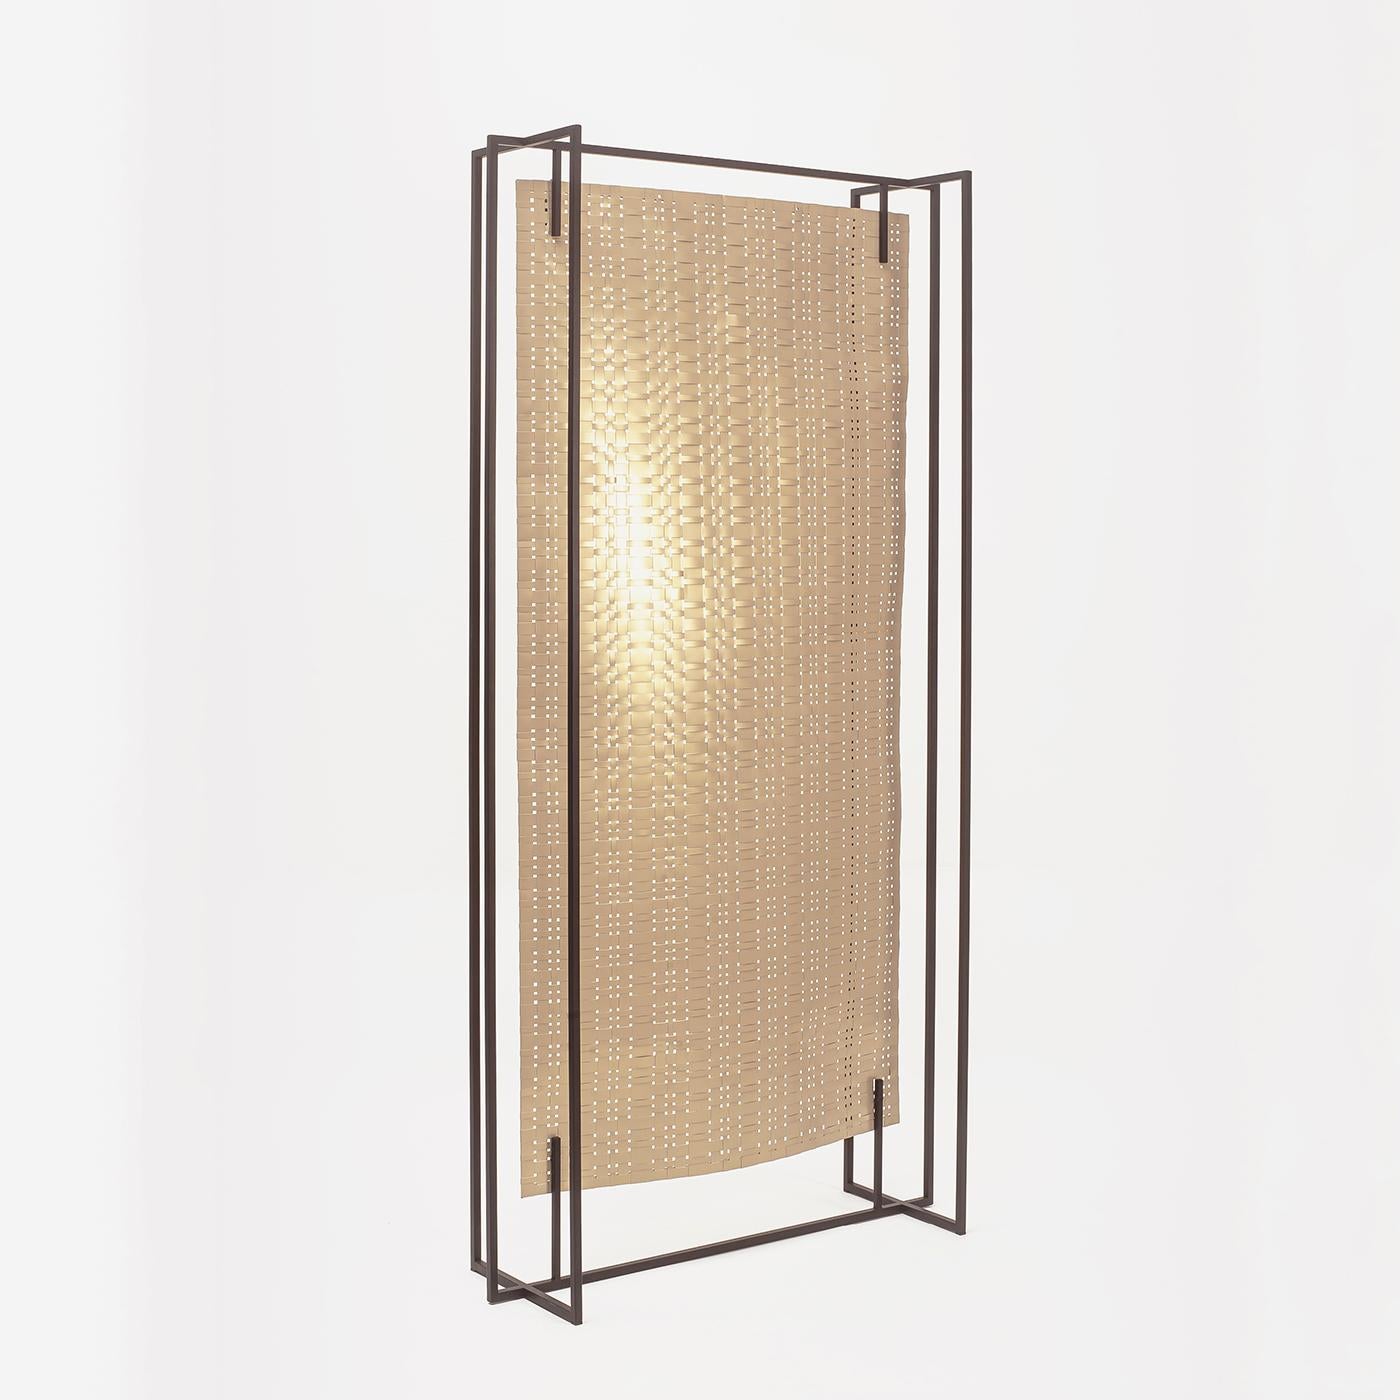 This contemporary screen is perfectly suited for dividing a large, loft-style interior, separating a private corner in a bedroom, or even creating a dynamic backdrop for a bare wall. An open, geometric frame in black-painted tubular iron showcases